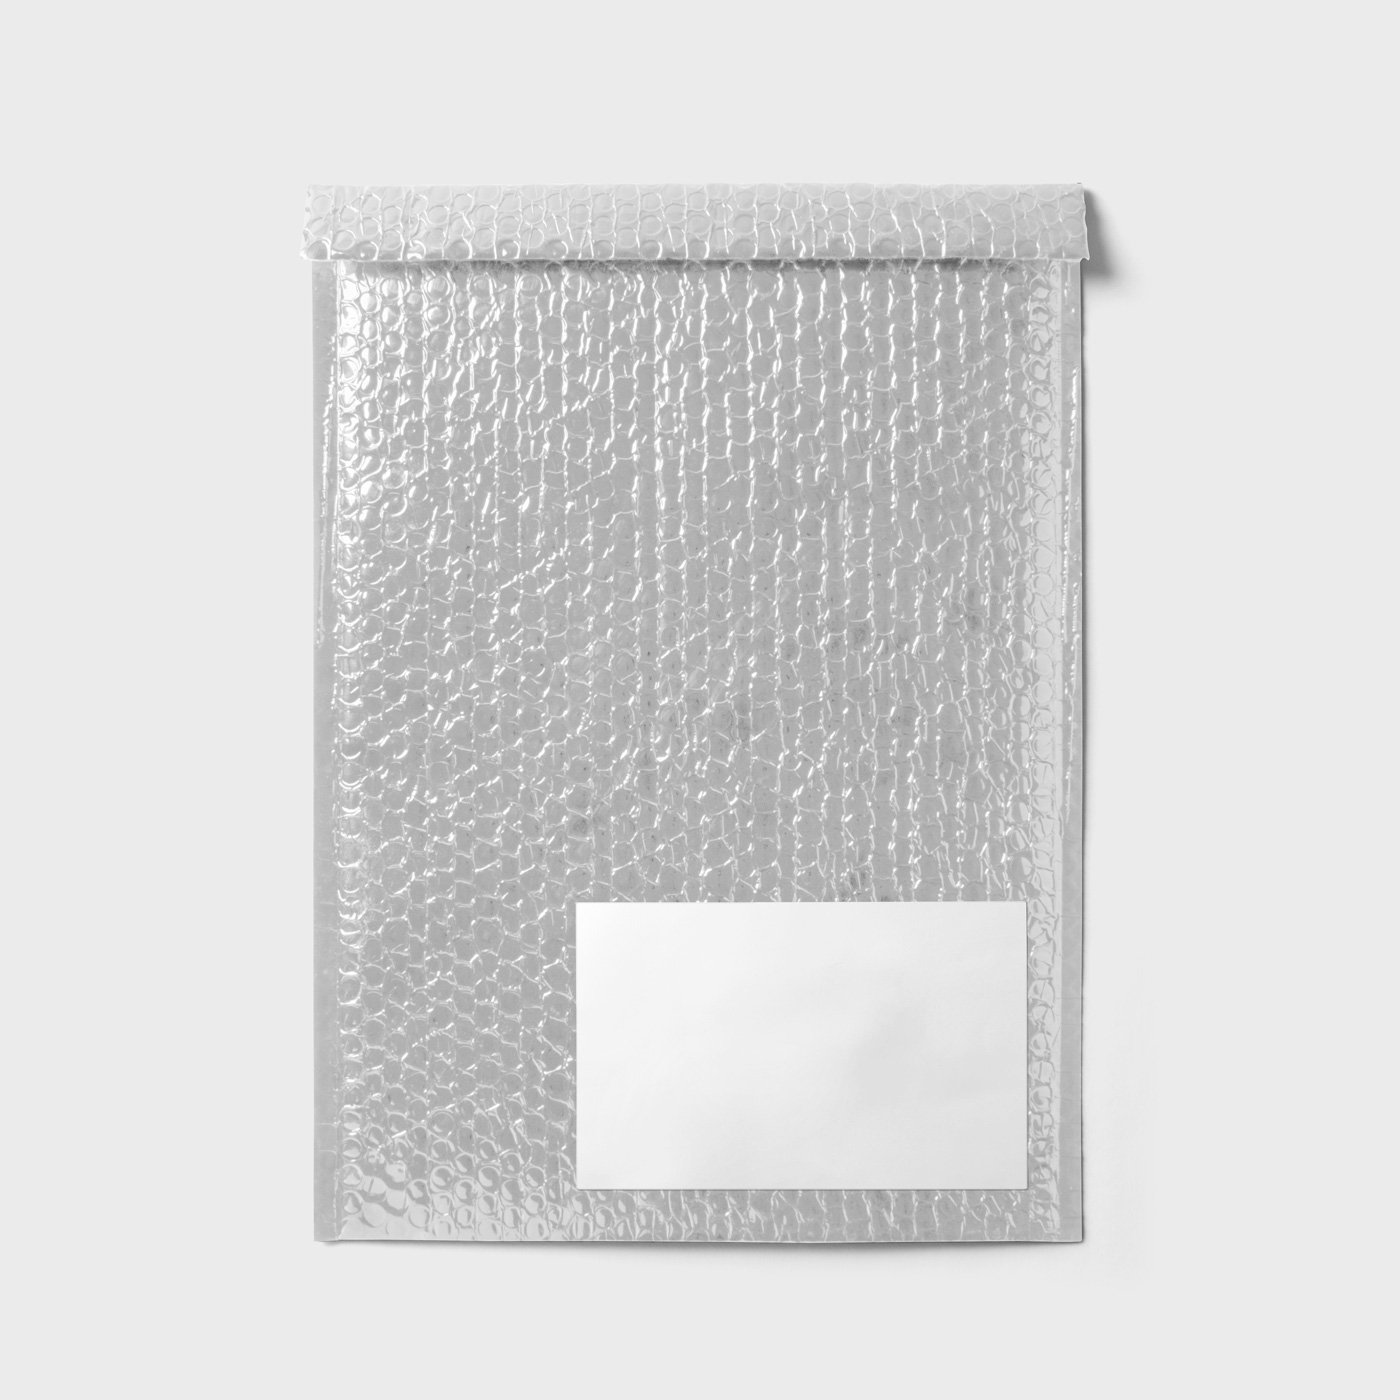 Front View of Rectangular Bubble Envelope Mockup FREE PSD